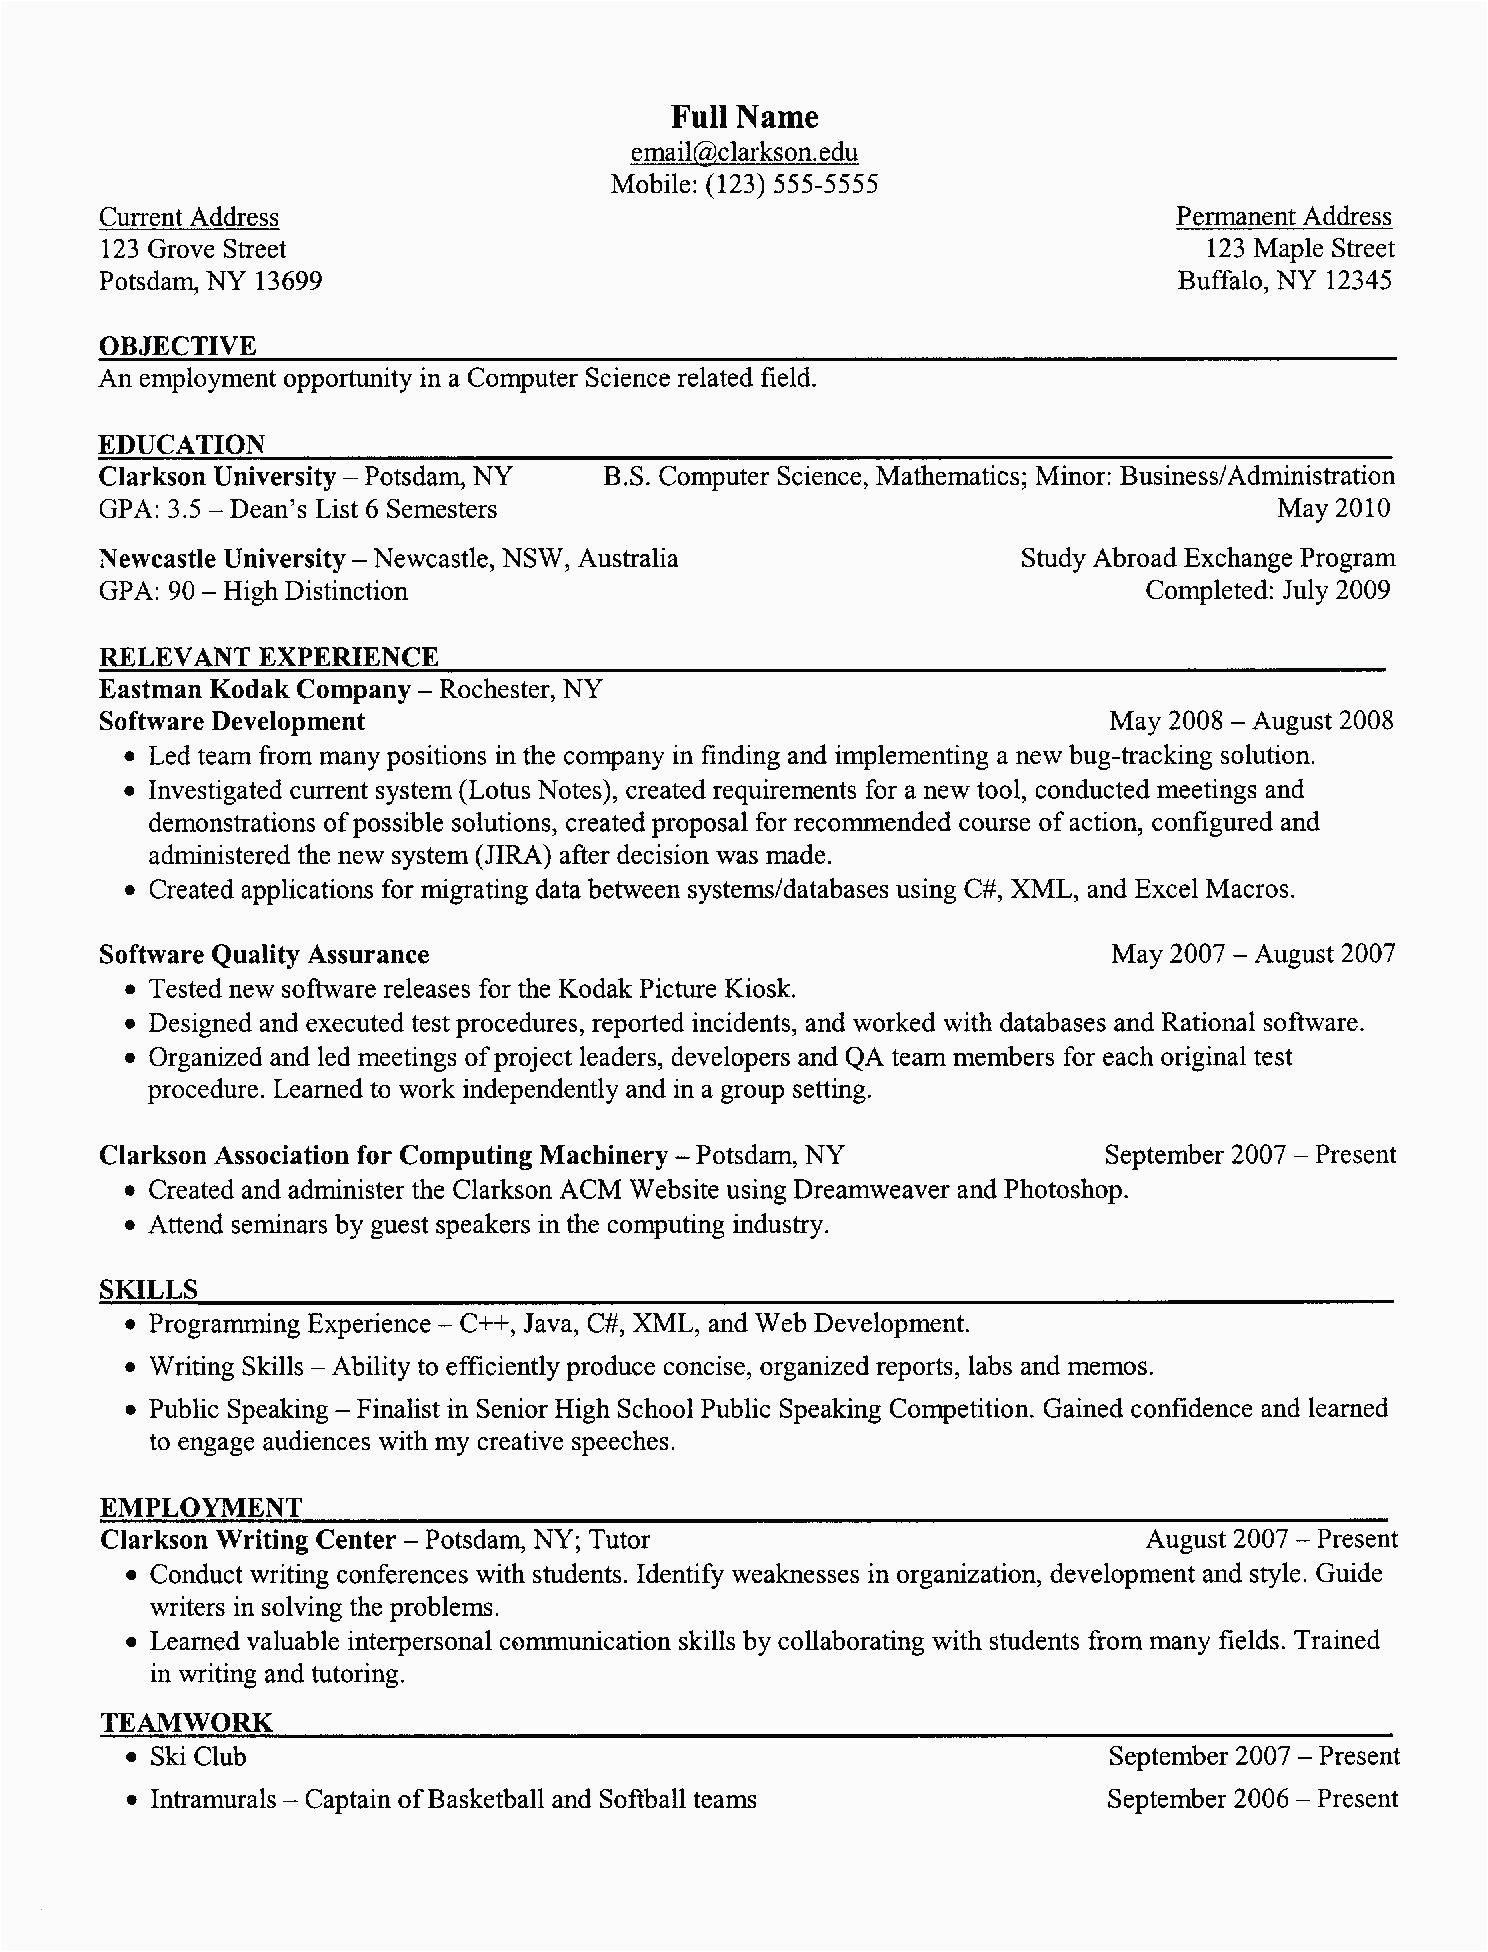 Sample Resume for Computer Science Engineering Students 13 Puter Science Graduate Resume Template Samples